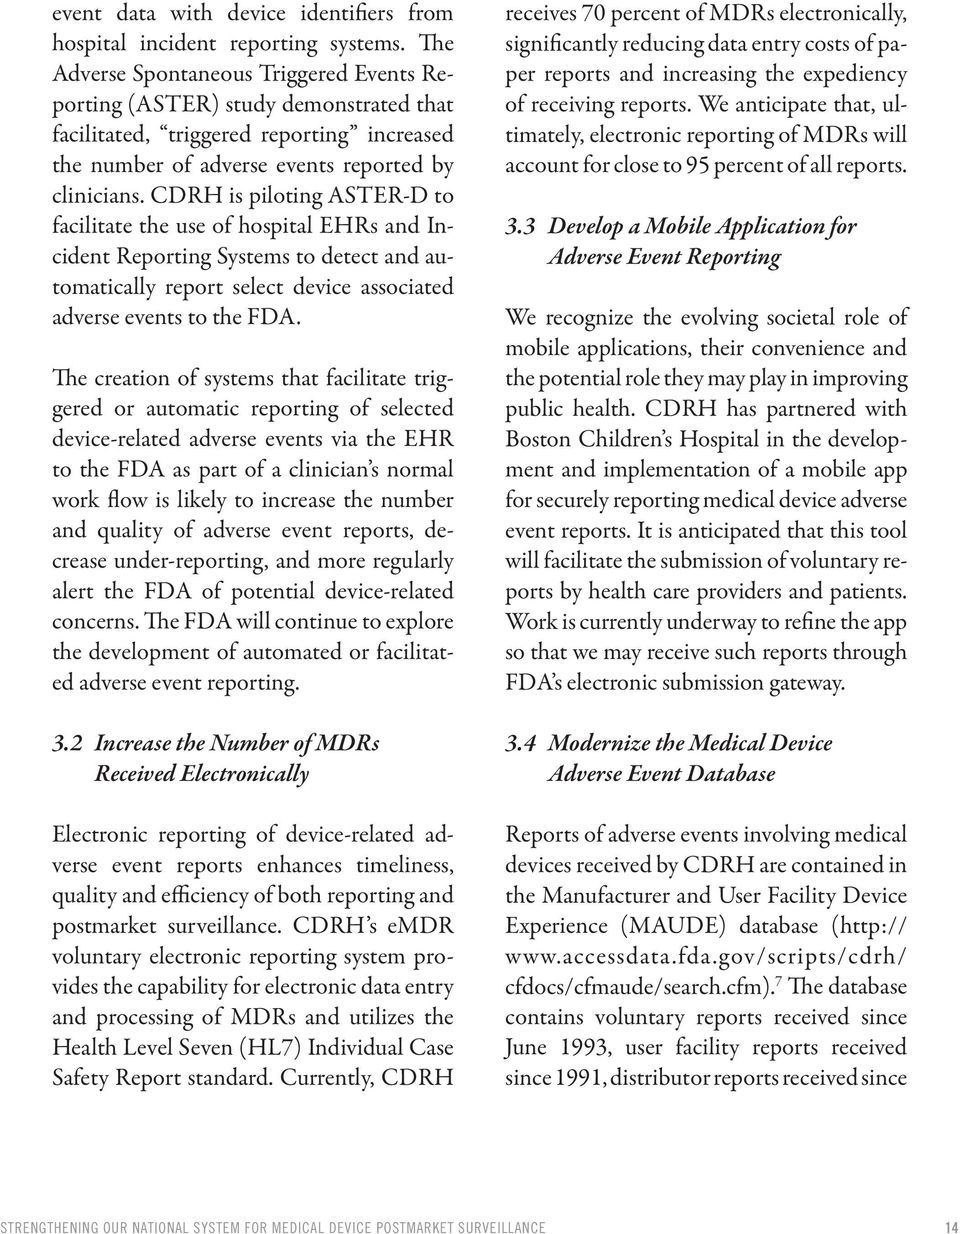 CDRH is piloting ASTER-D to facilitate the use of hospital EHRs and Incident Reporting Systems to detect and automatically report select device associated adverse events to the FDA.